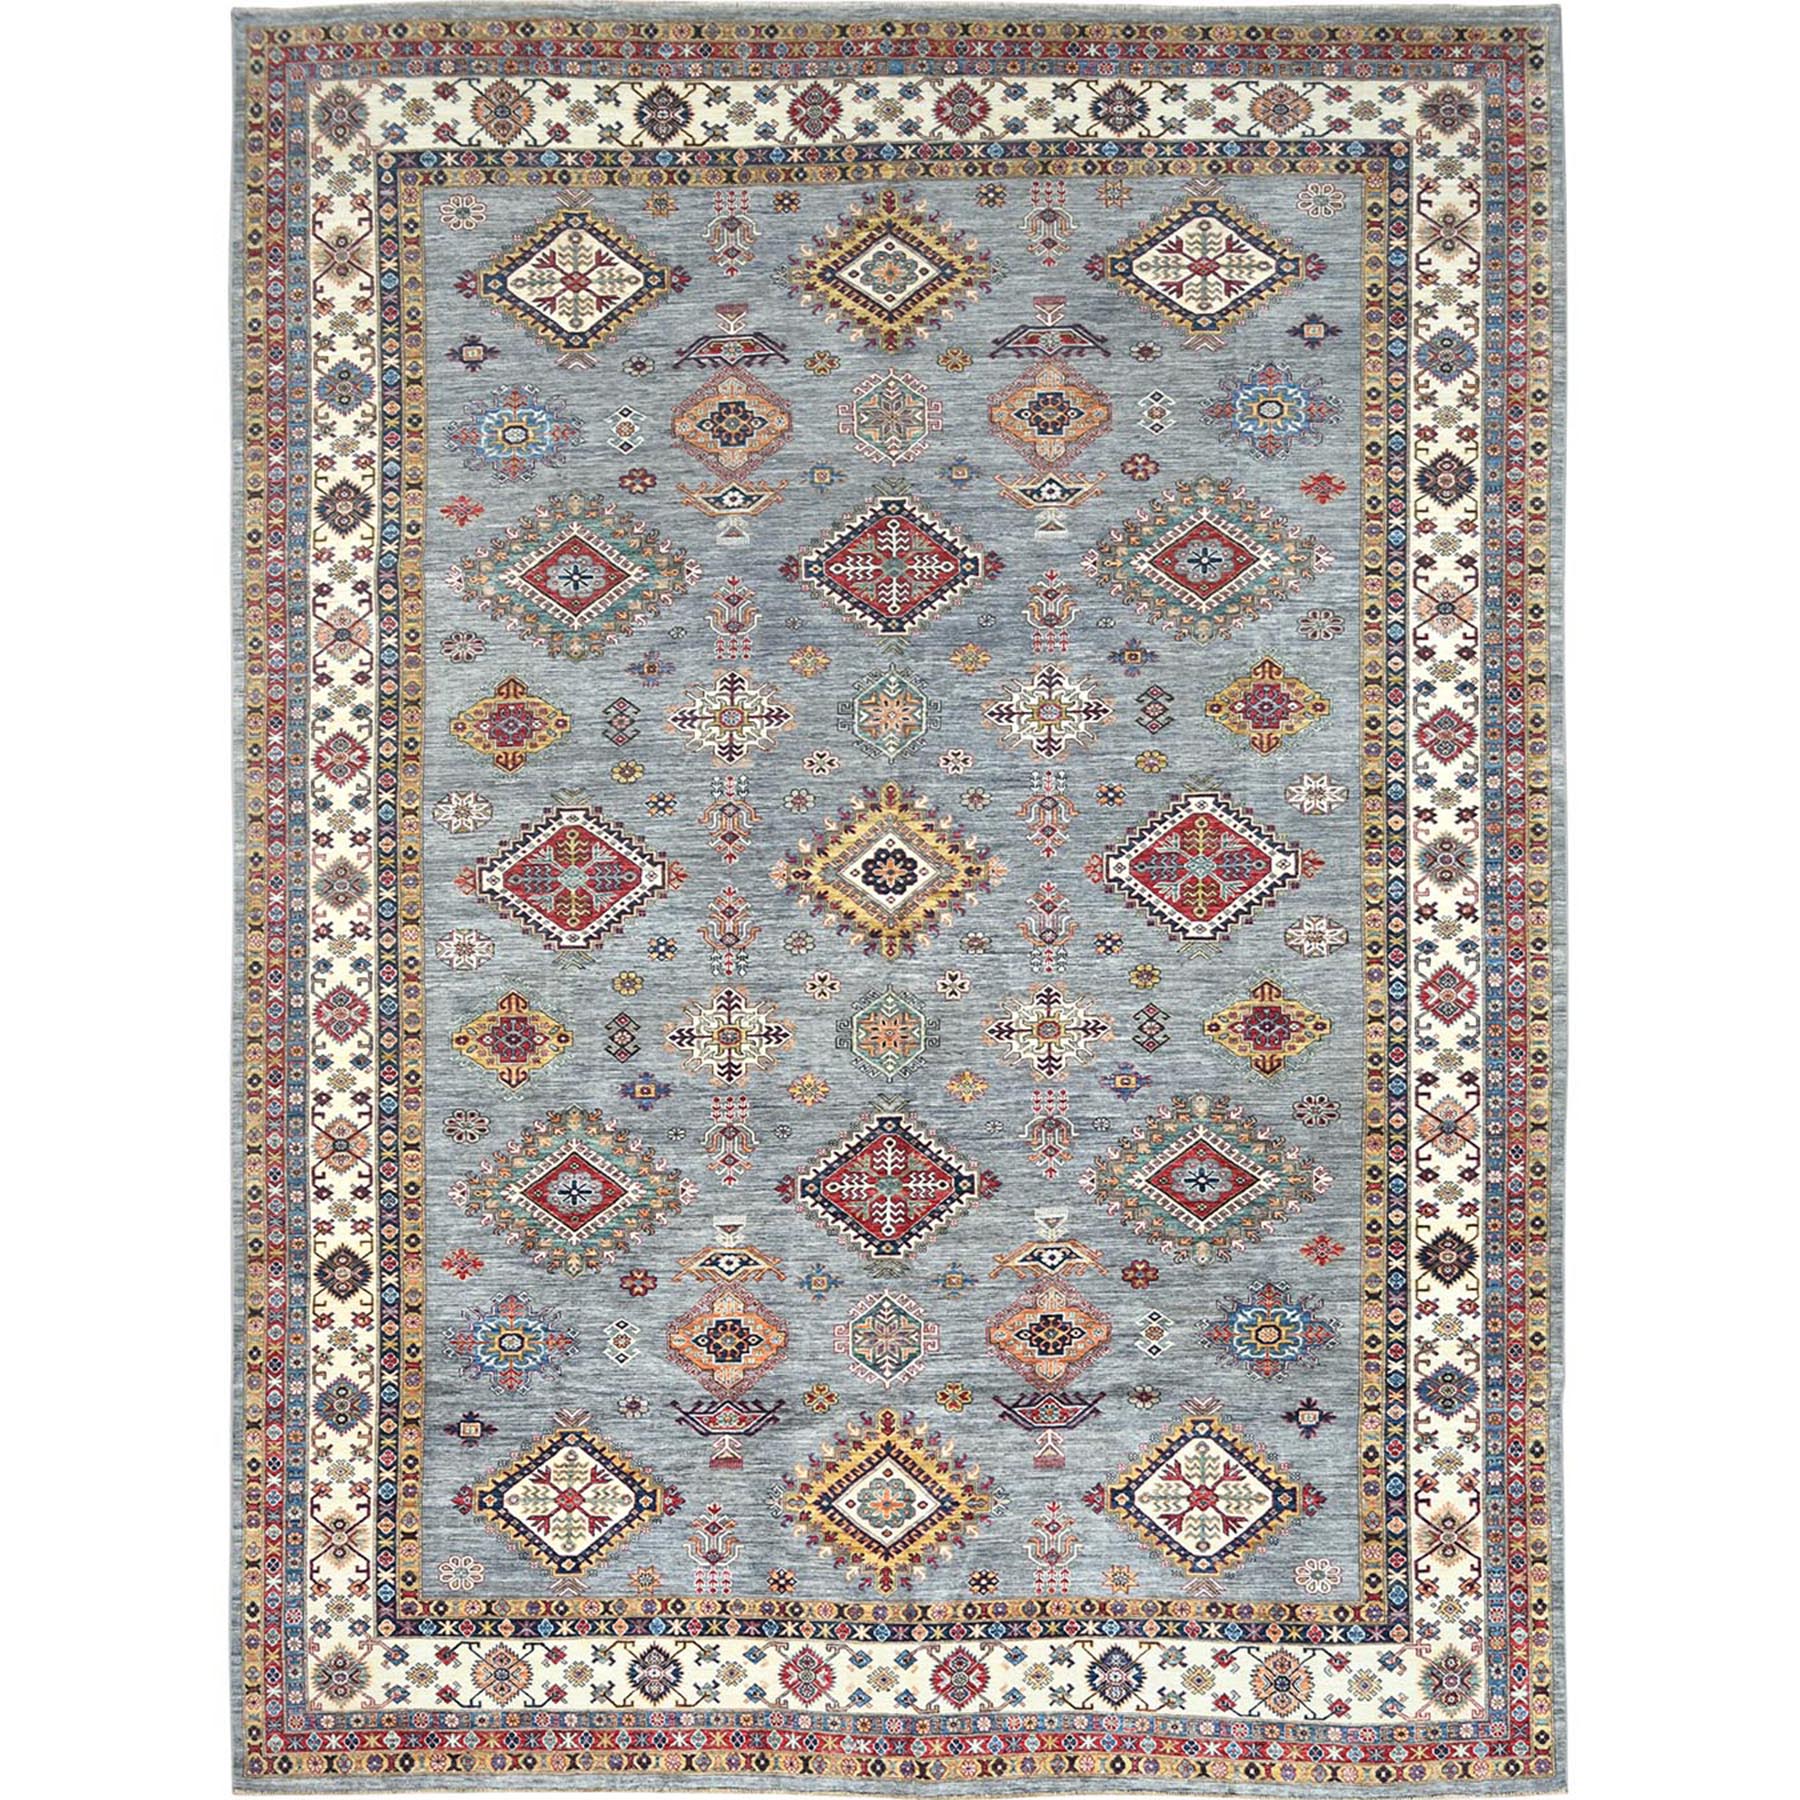  Wool Hand-Knotted Area Rug 11'8